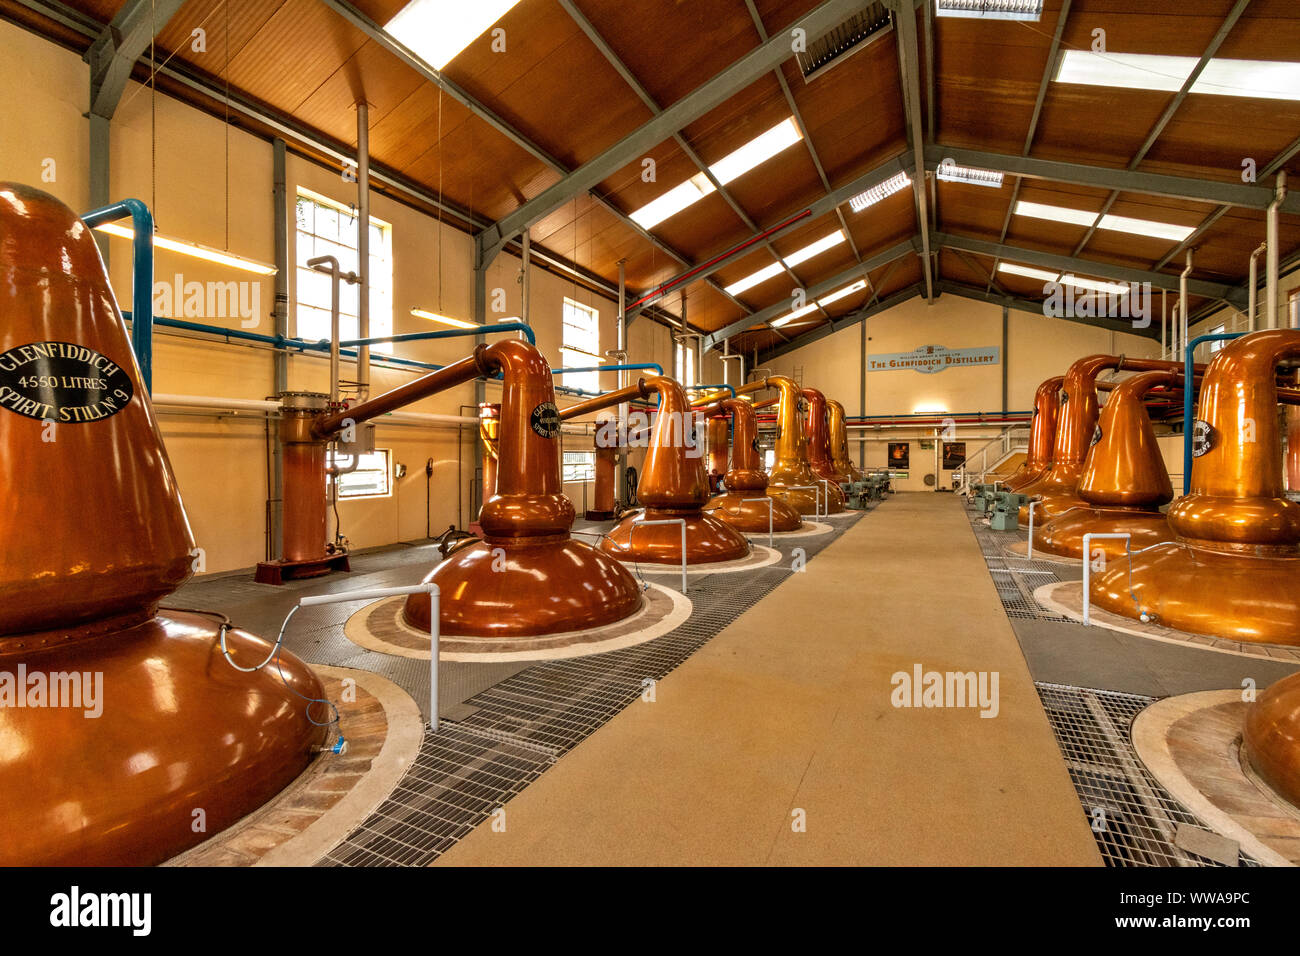 GLENFIDDICH WHISKY DISTILLERY DUFFTOWN MORAY SCOTLAND GLENFIDDICH ROWS OF COPPER POT STILLS  AND SIGN SHOWING THE CAPACITY OF EACH STILL Stock Photo